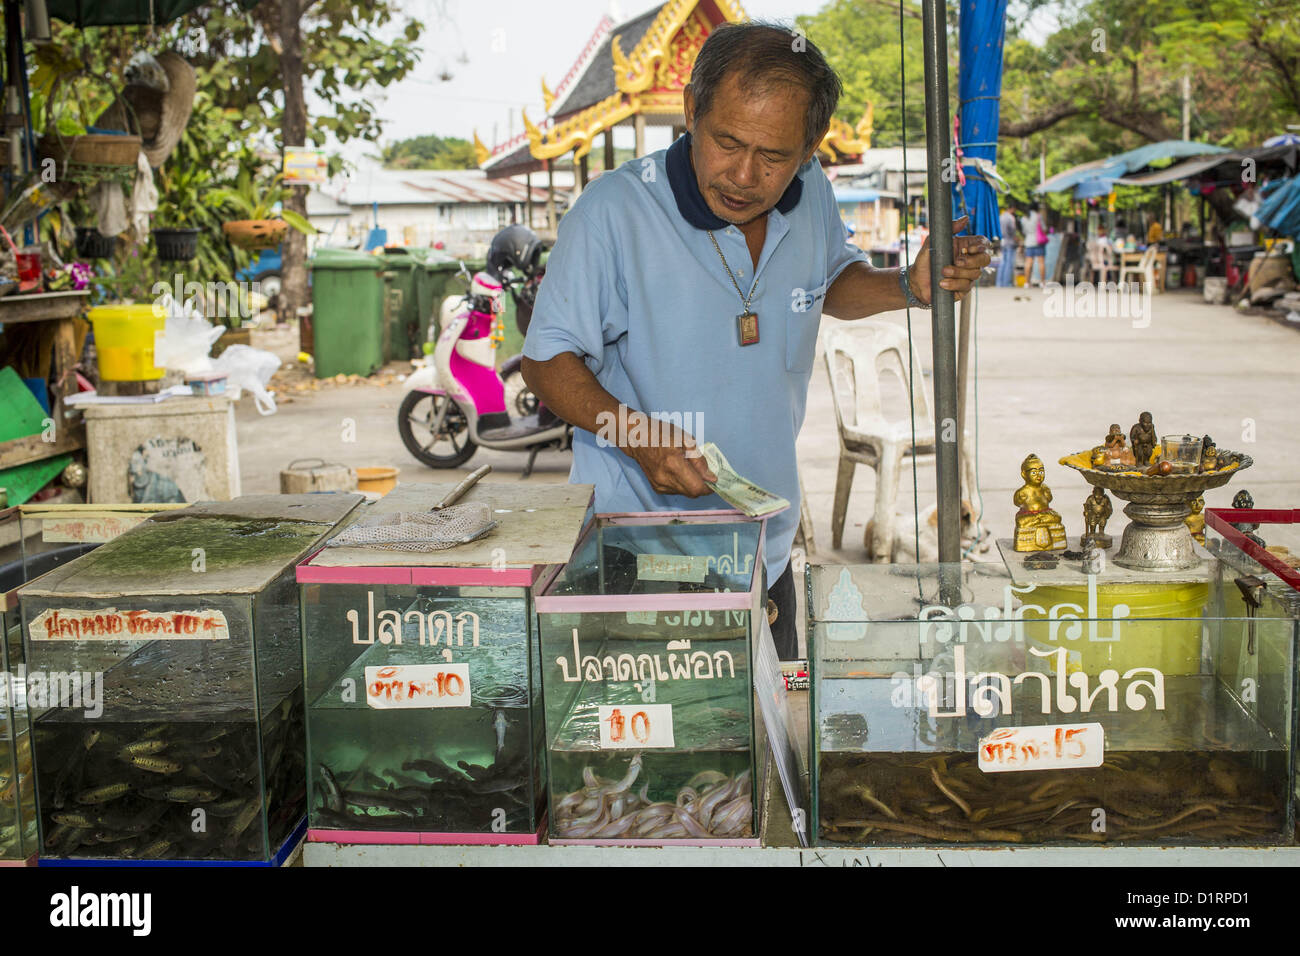 Jan. 4, 2013 - Bangkok, Thailand - A man who sells fish that are released into a nearby canal blesses his fish tanks after his first sale of the day at Wat Mahabut in eastern Bangkok. The temple was built in 1762 and predates the founding of the city of Bangkok. Just a few minutes from downtown Bangkok, the neighborhoods around Wat Mahabut are interlaced with canals and still resemble the Bangkok of 60 years ago. Wat Mahabut is a large temple off Sukhumvit Soi 77. The temple is the site of many shrines to Thai ghosts. Many fortune tellers also work on the temple's grounds. (Credit Image: © Jac Stock Photo